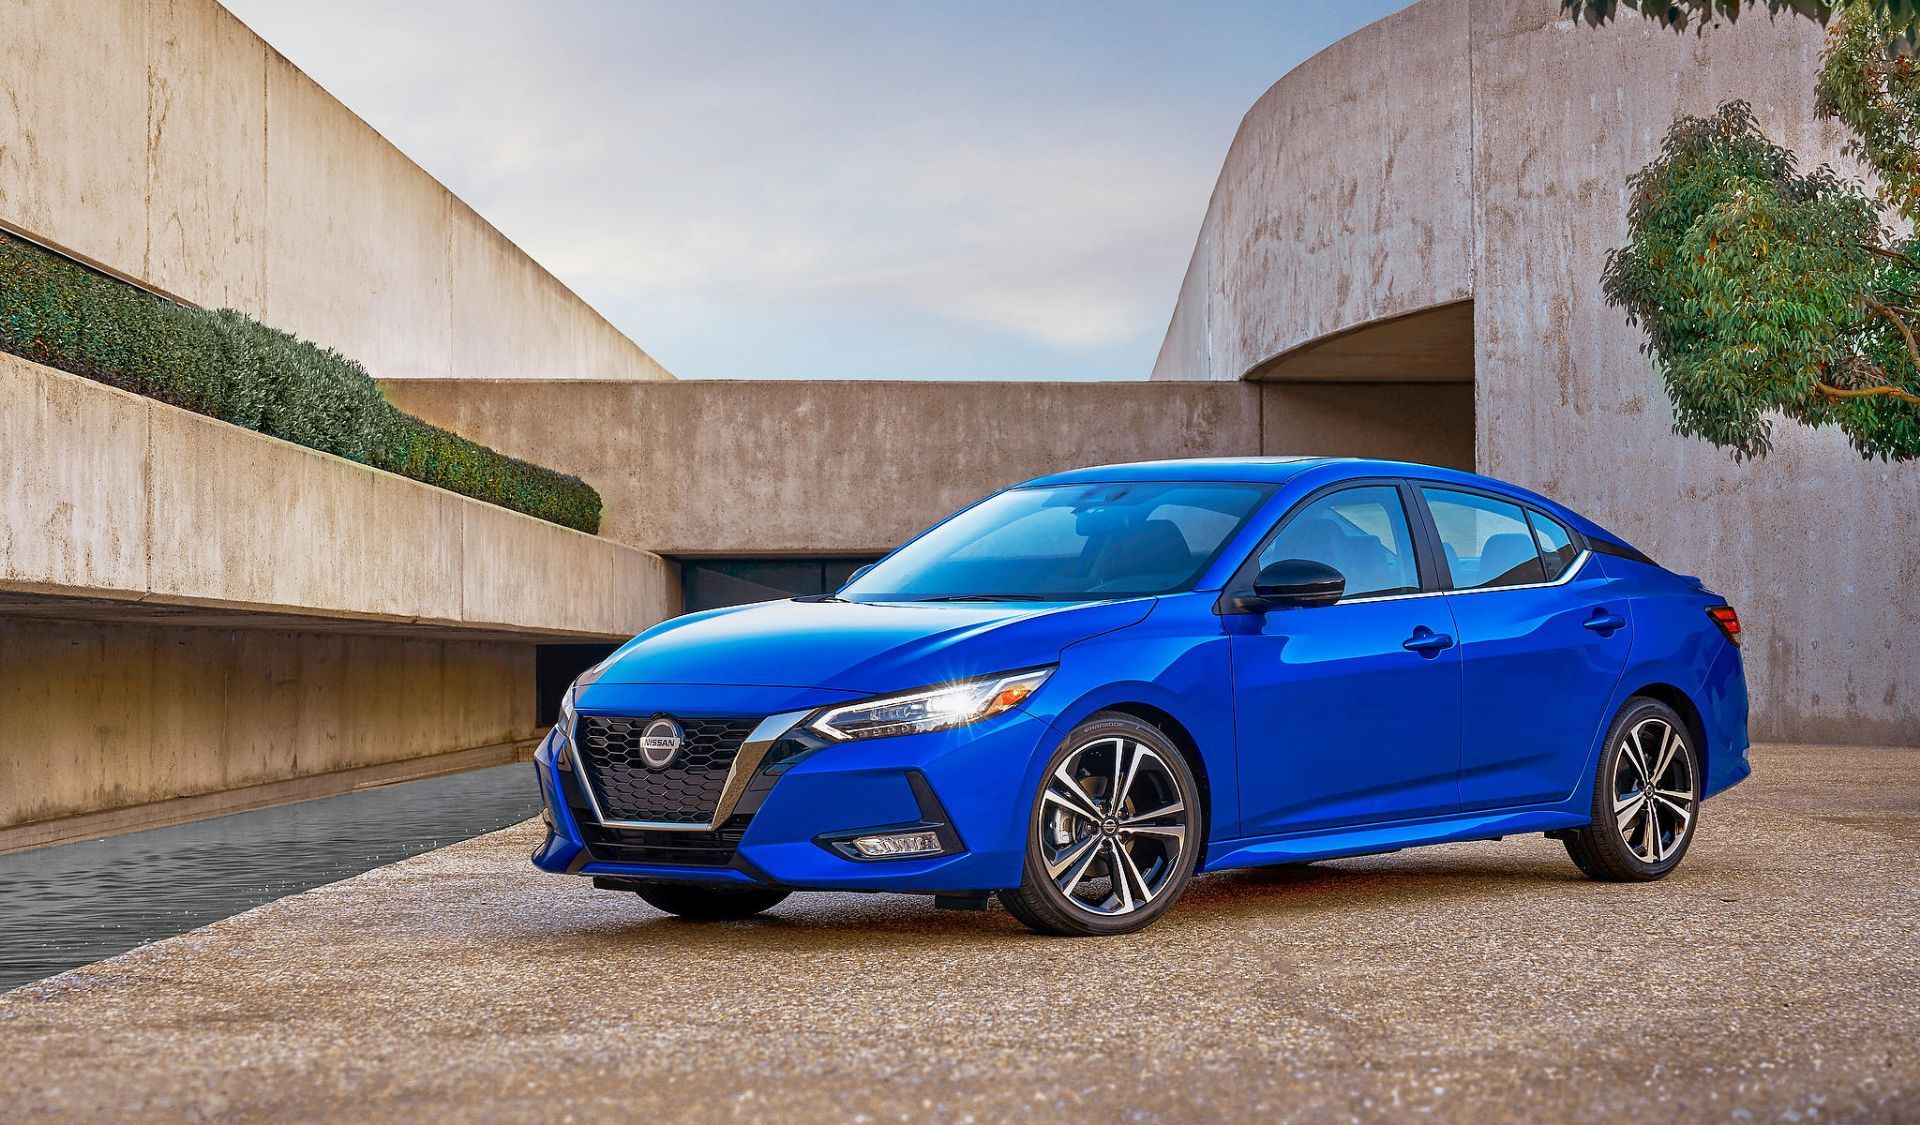 What makes Nissan pre-owned vehicles stand out from the competition?